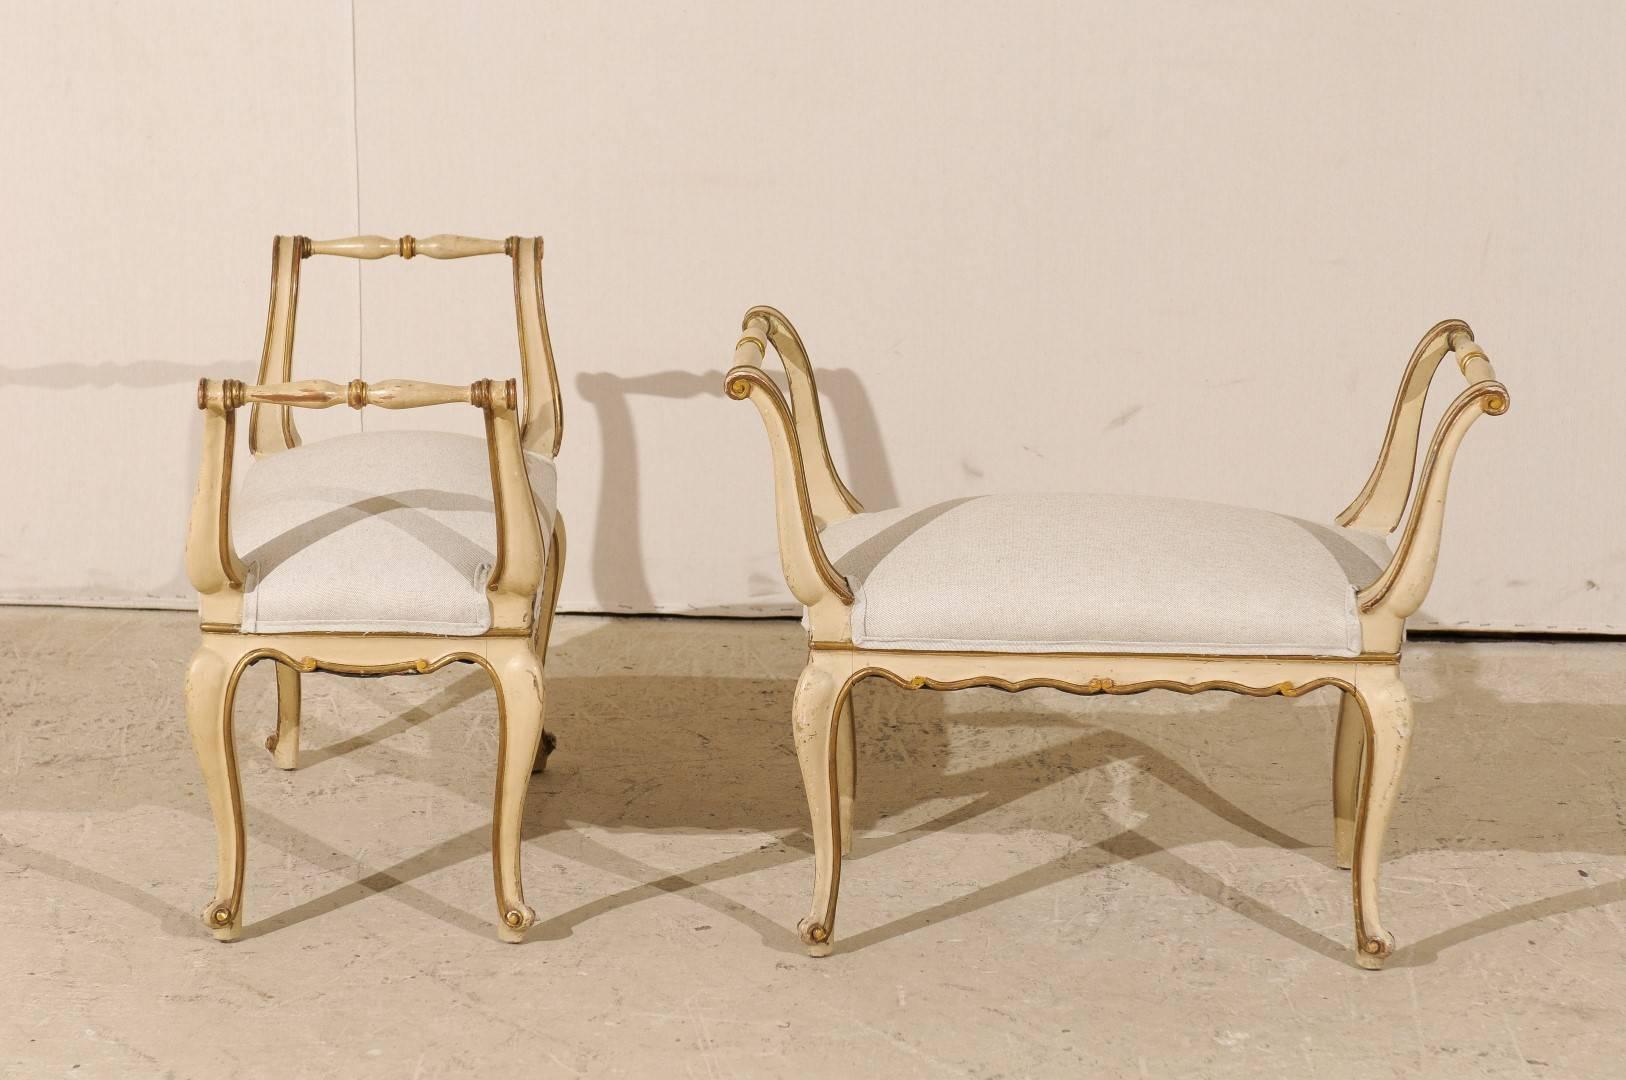 A pair of Italian vintage stools. These Italian mid-20th century wooden stools feature nice scrolled arms, cabriole legs, a nicely scalloped skirt and original paint made of beige, gold accents and brown trim. The stools have been newly upholstered